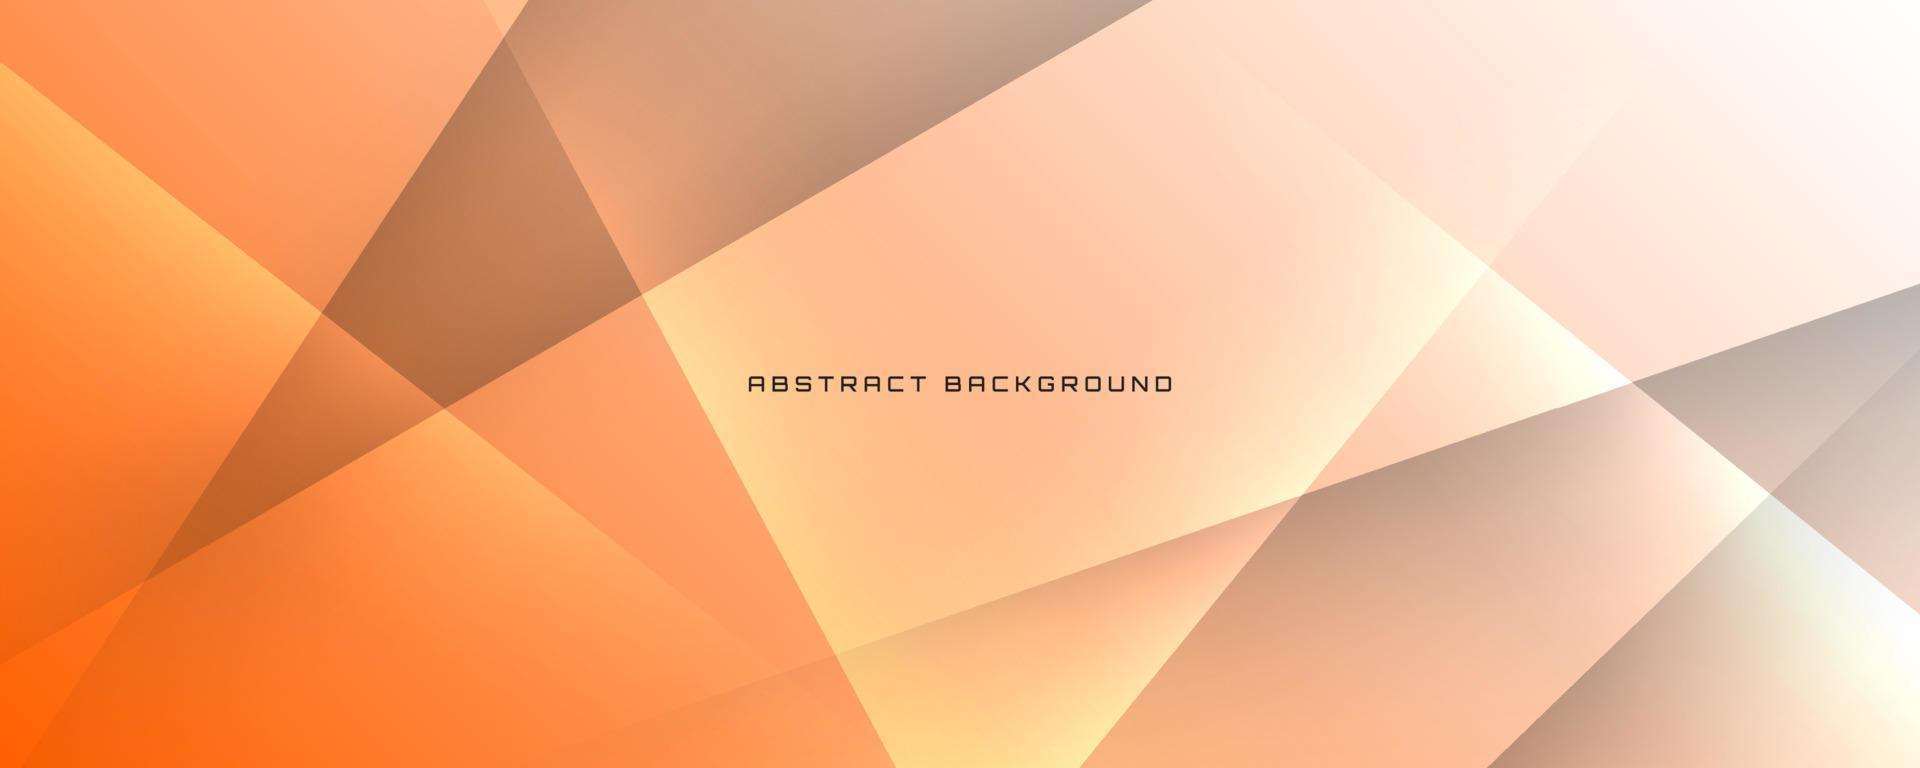 3D orange white geometric abstract background overlap layer on bright space with cutout decoration. Simple graphic design element future style concept for banner, flyer, card, cover, or brochure vector